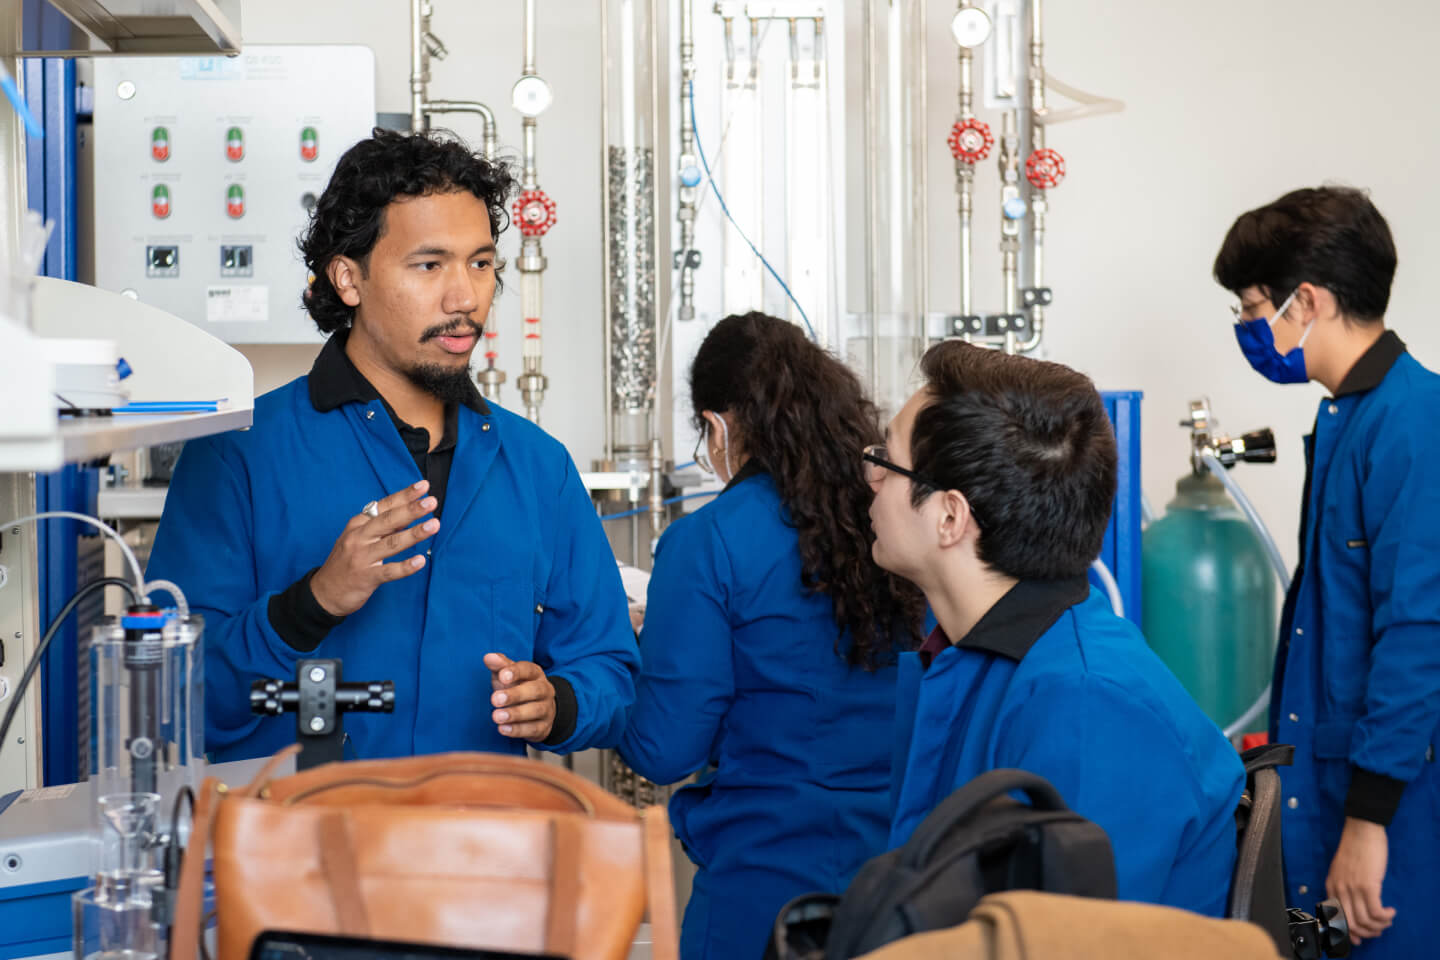 Students and professor inside a lab wearing blue coats